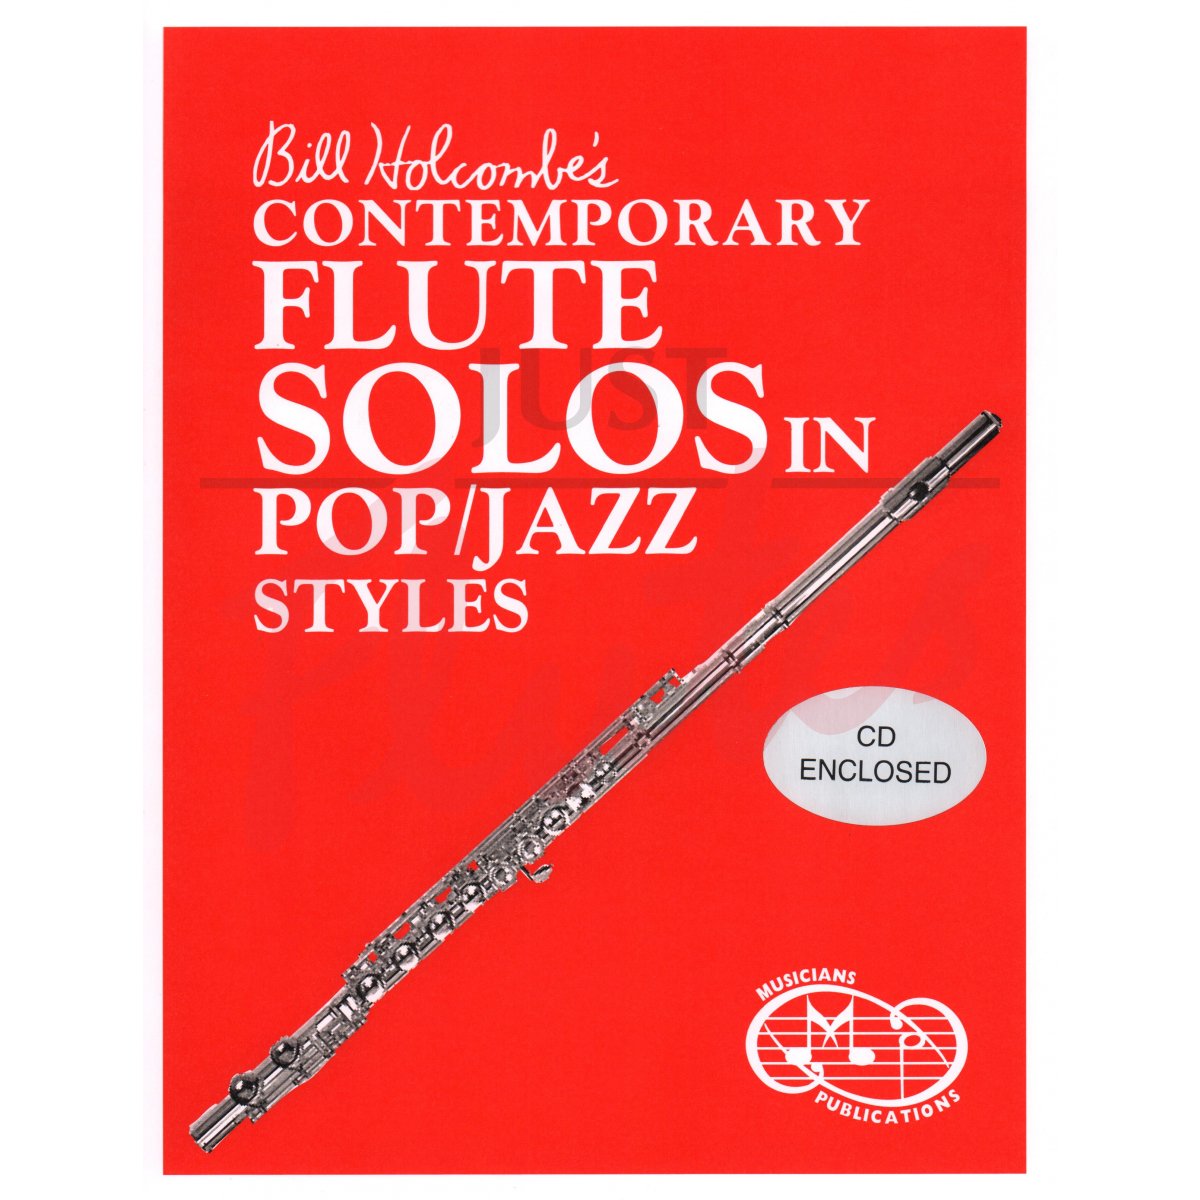 Contemporary Flute Solos in Pop/Jazz Styles